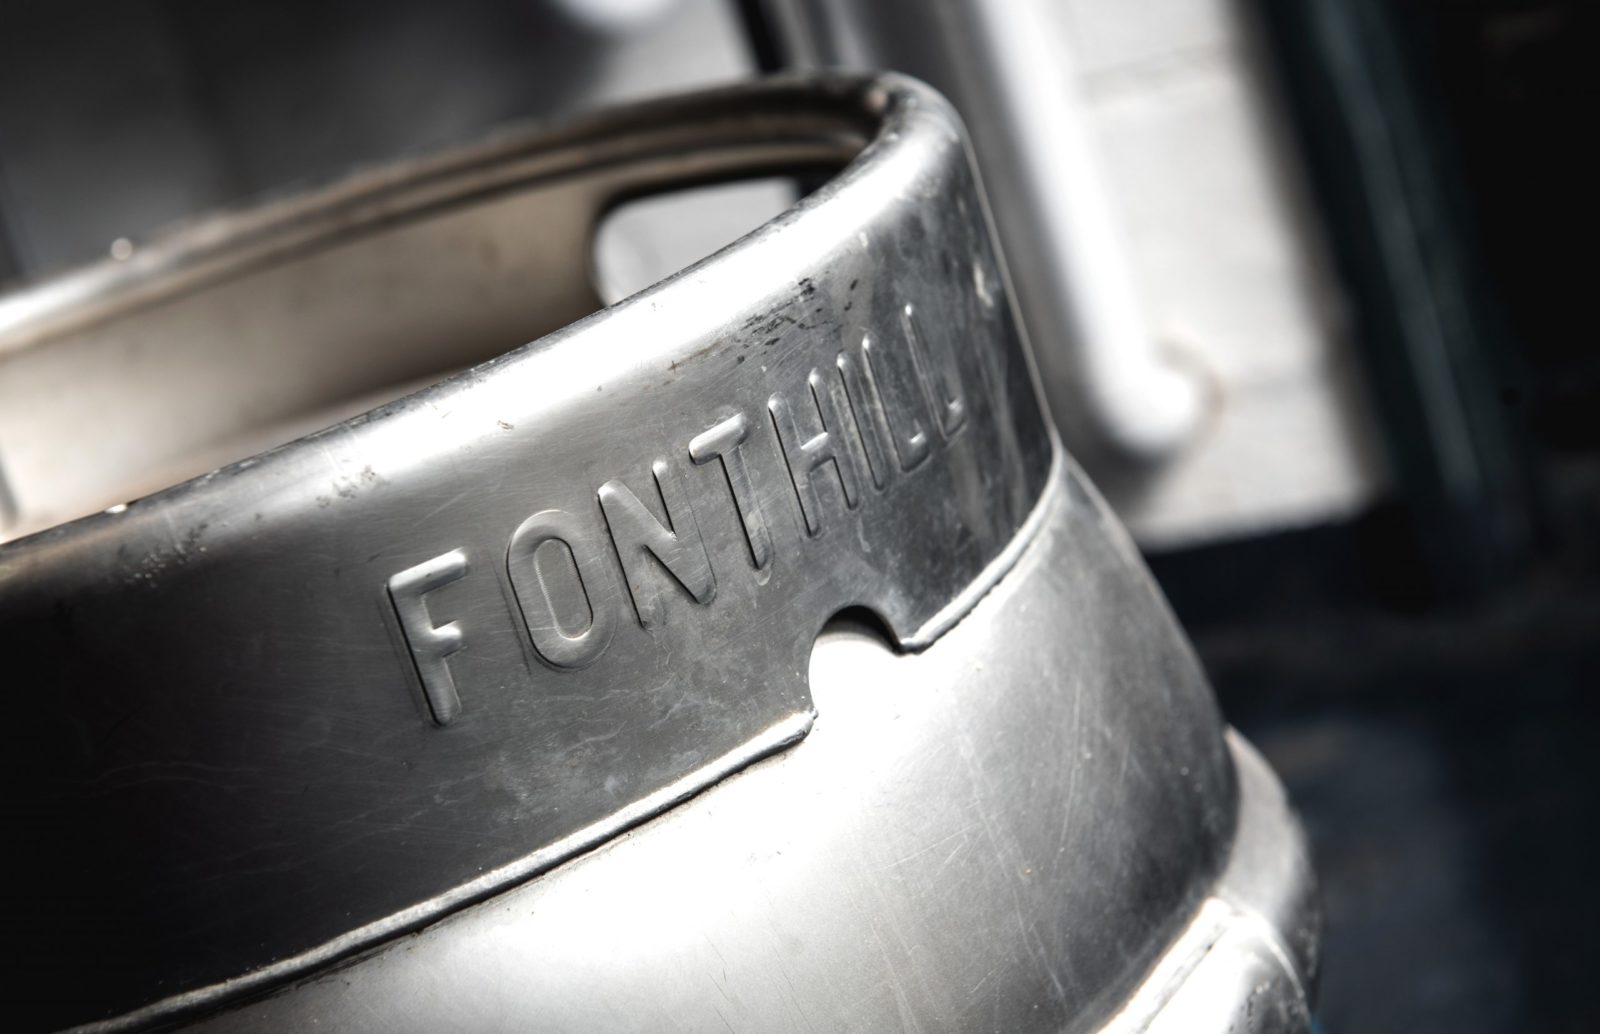 Close up of a keg of beer with the Fonthill logo printed on it